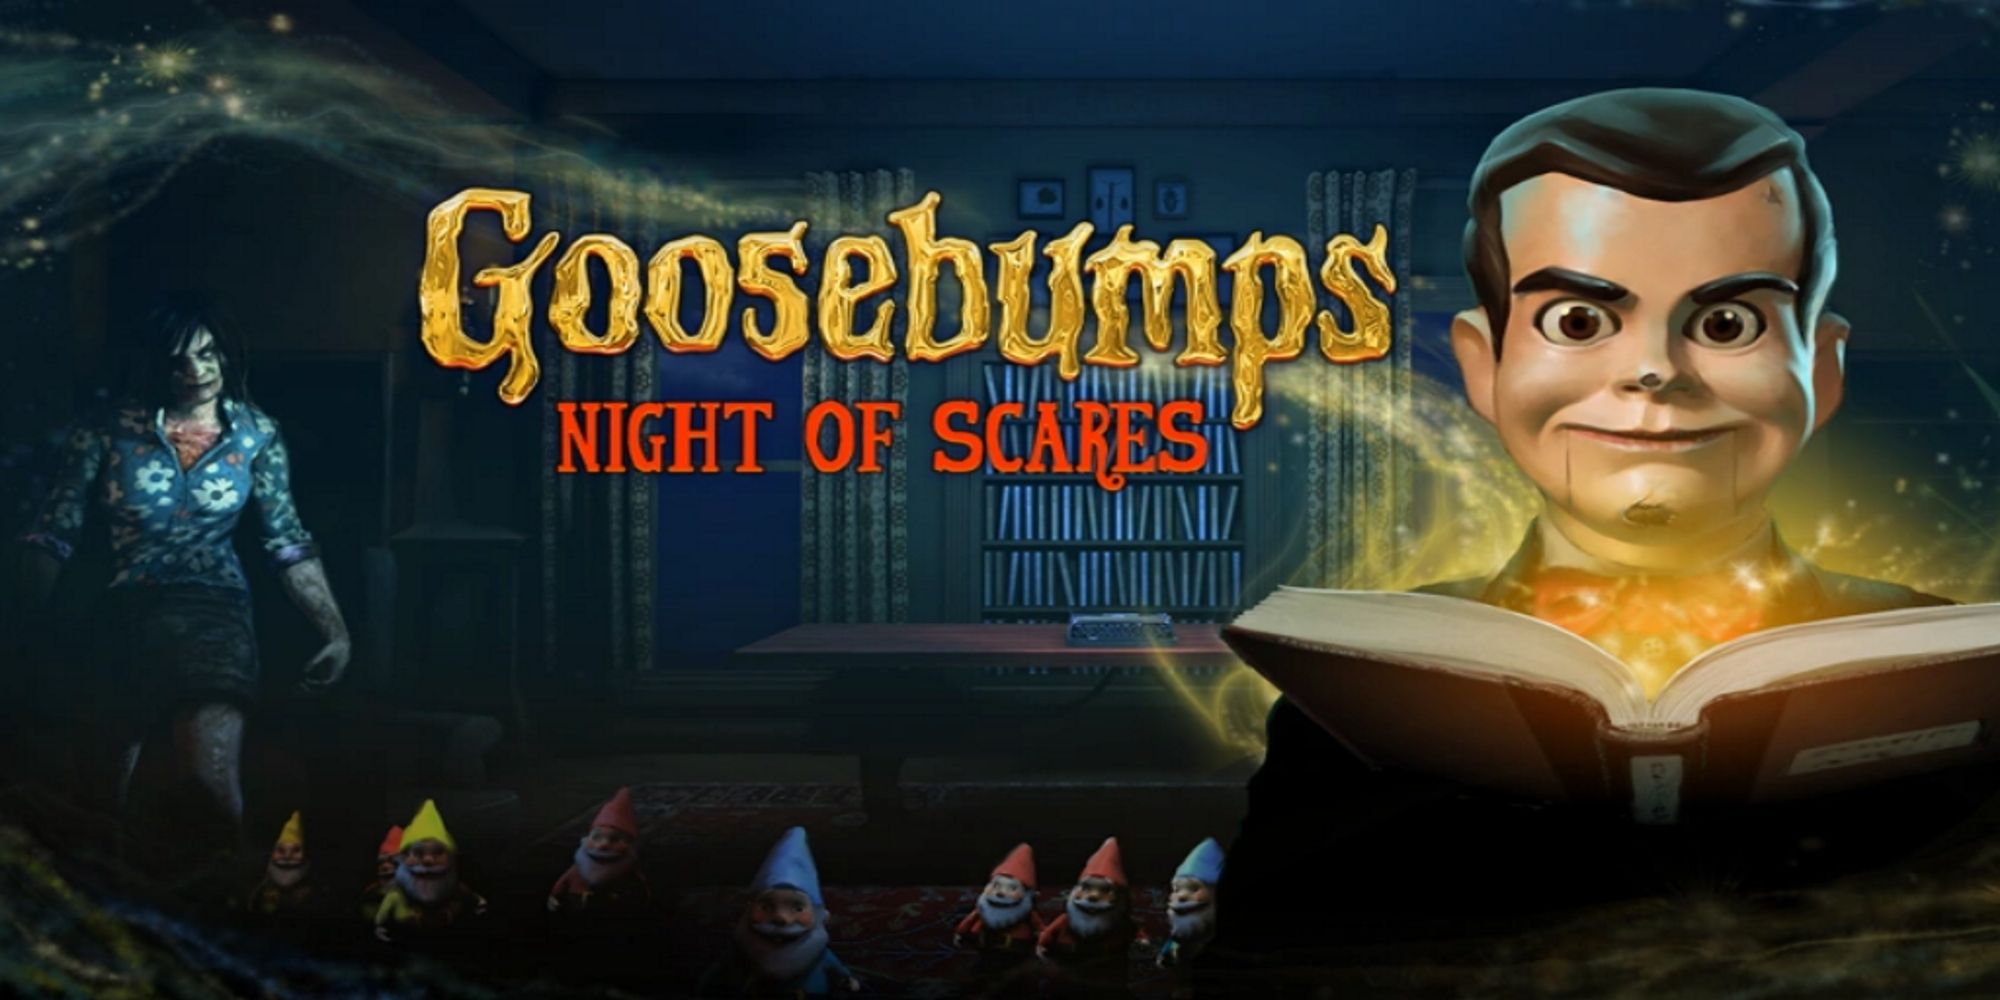 Goosebumps Night of Scares - Slappy Holding A Book While The Lawn Gnomes Stand Behind Him